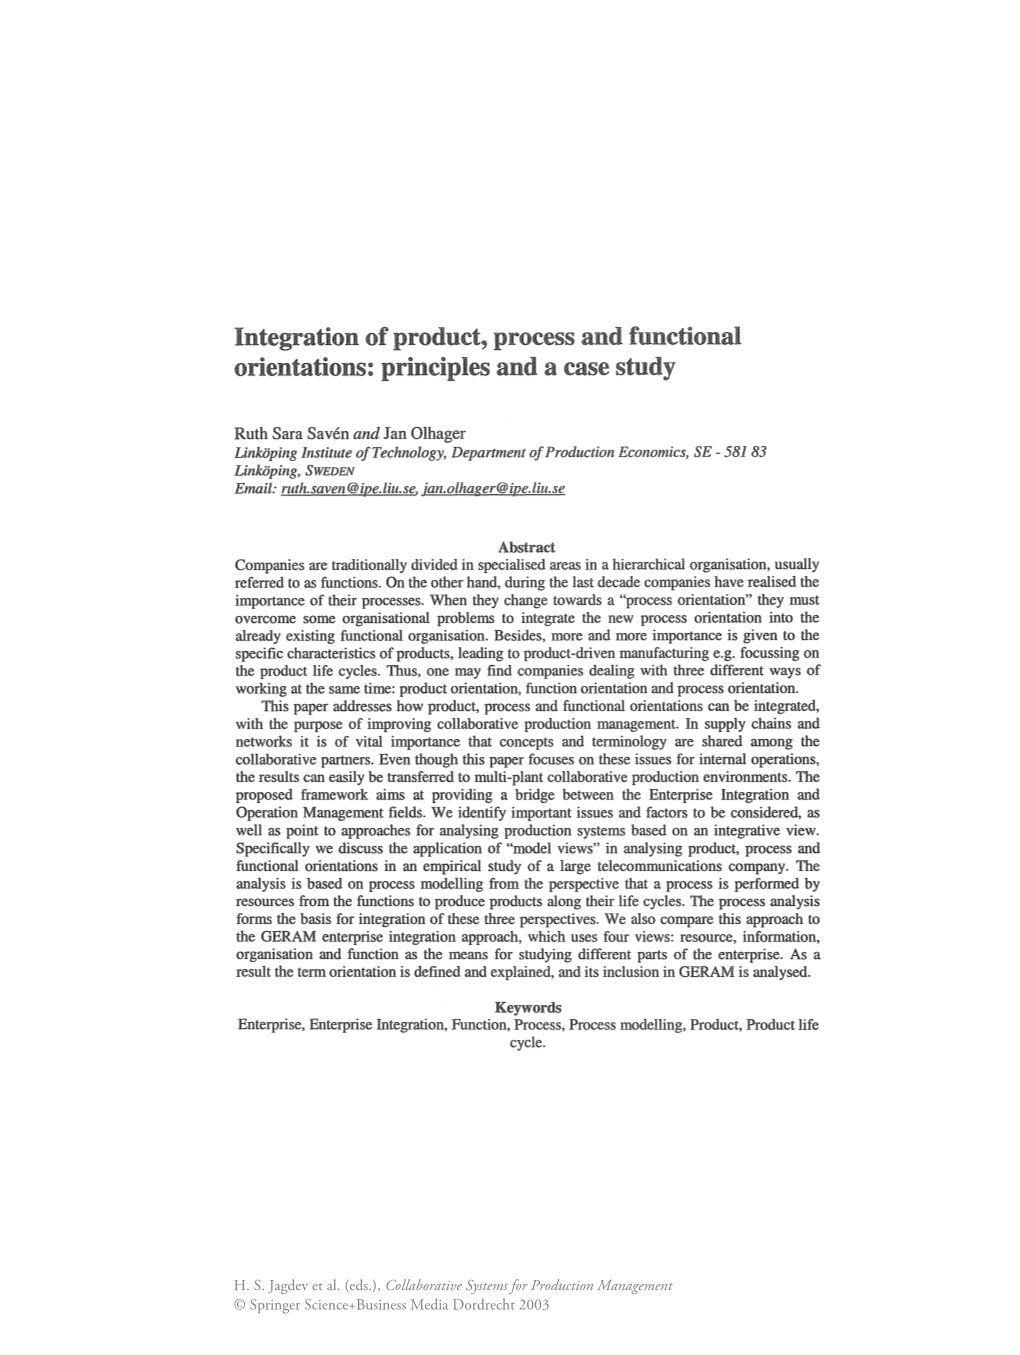 Integration of Product, Process and Functional Orientations: Principles and a Case Study